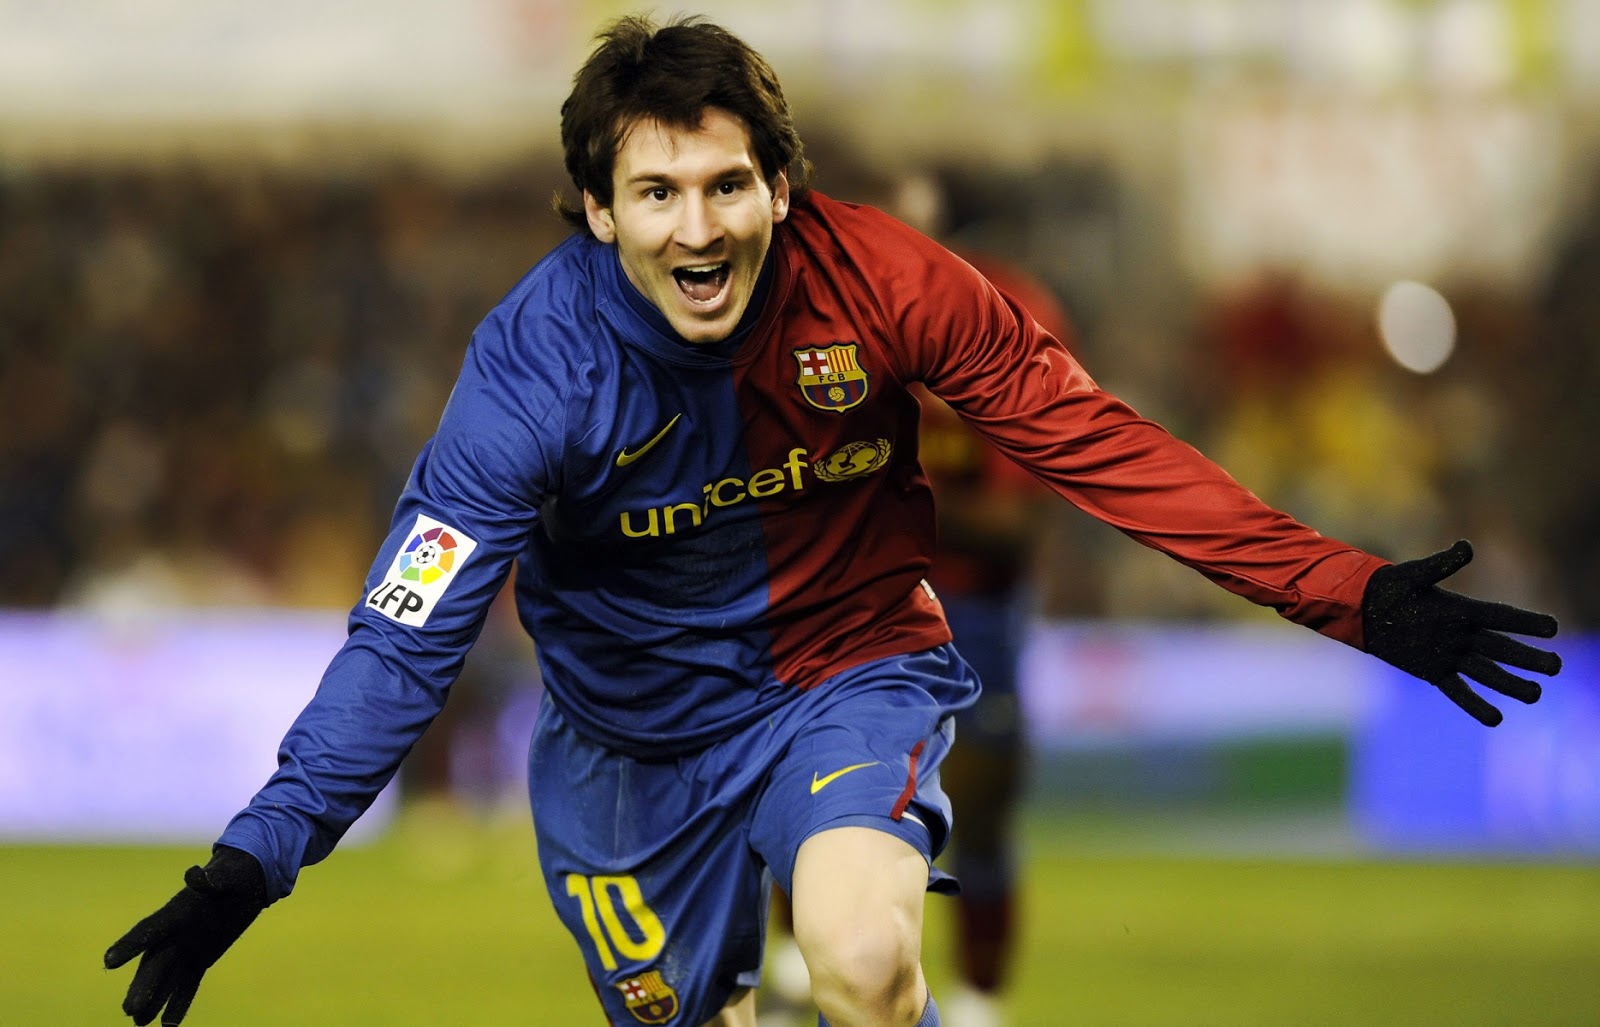 Lionel Messi Football Player Latest Hd Wallpapers 2013 | All Football ...